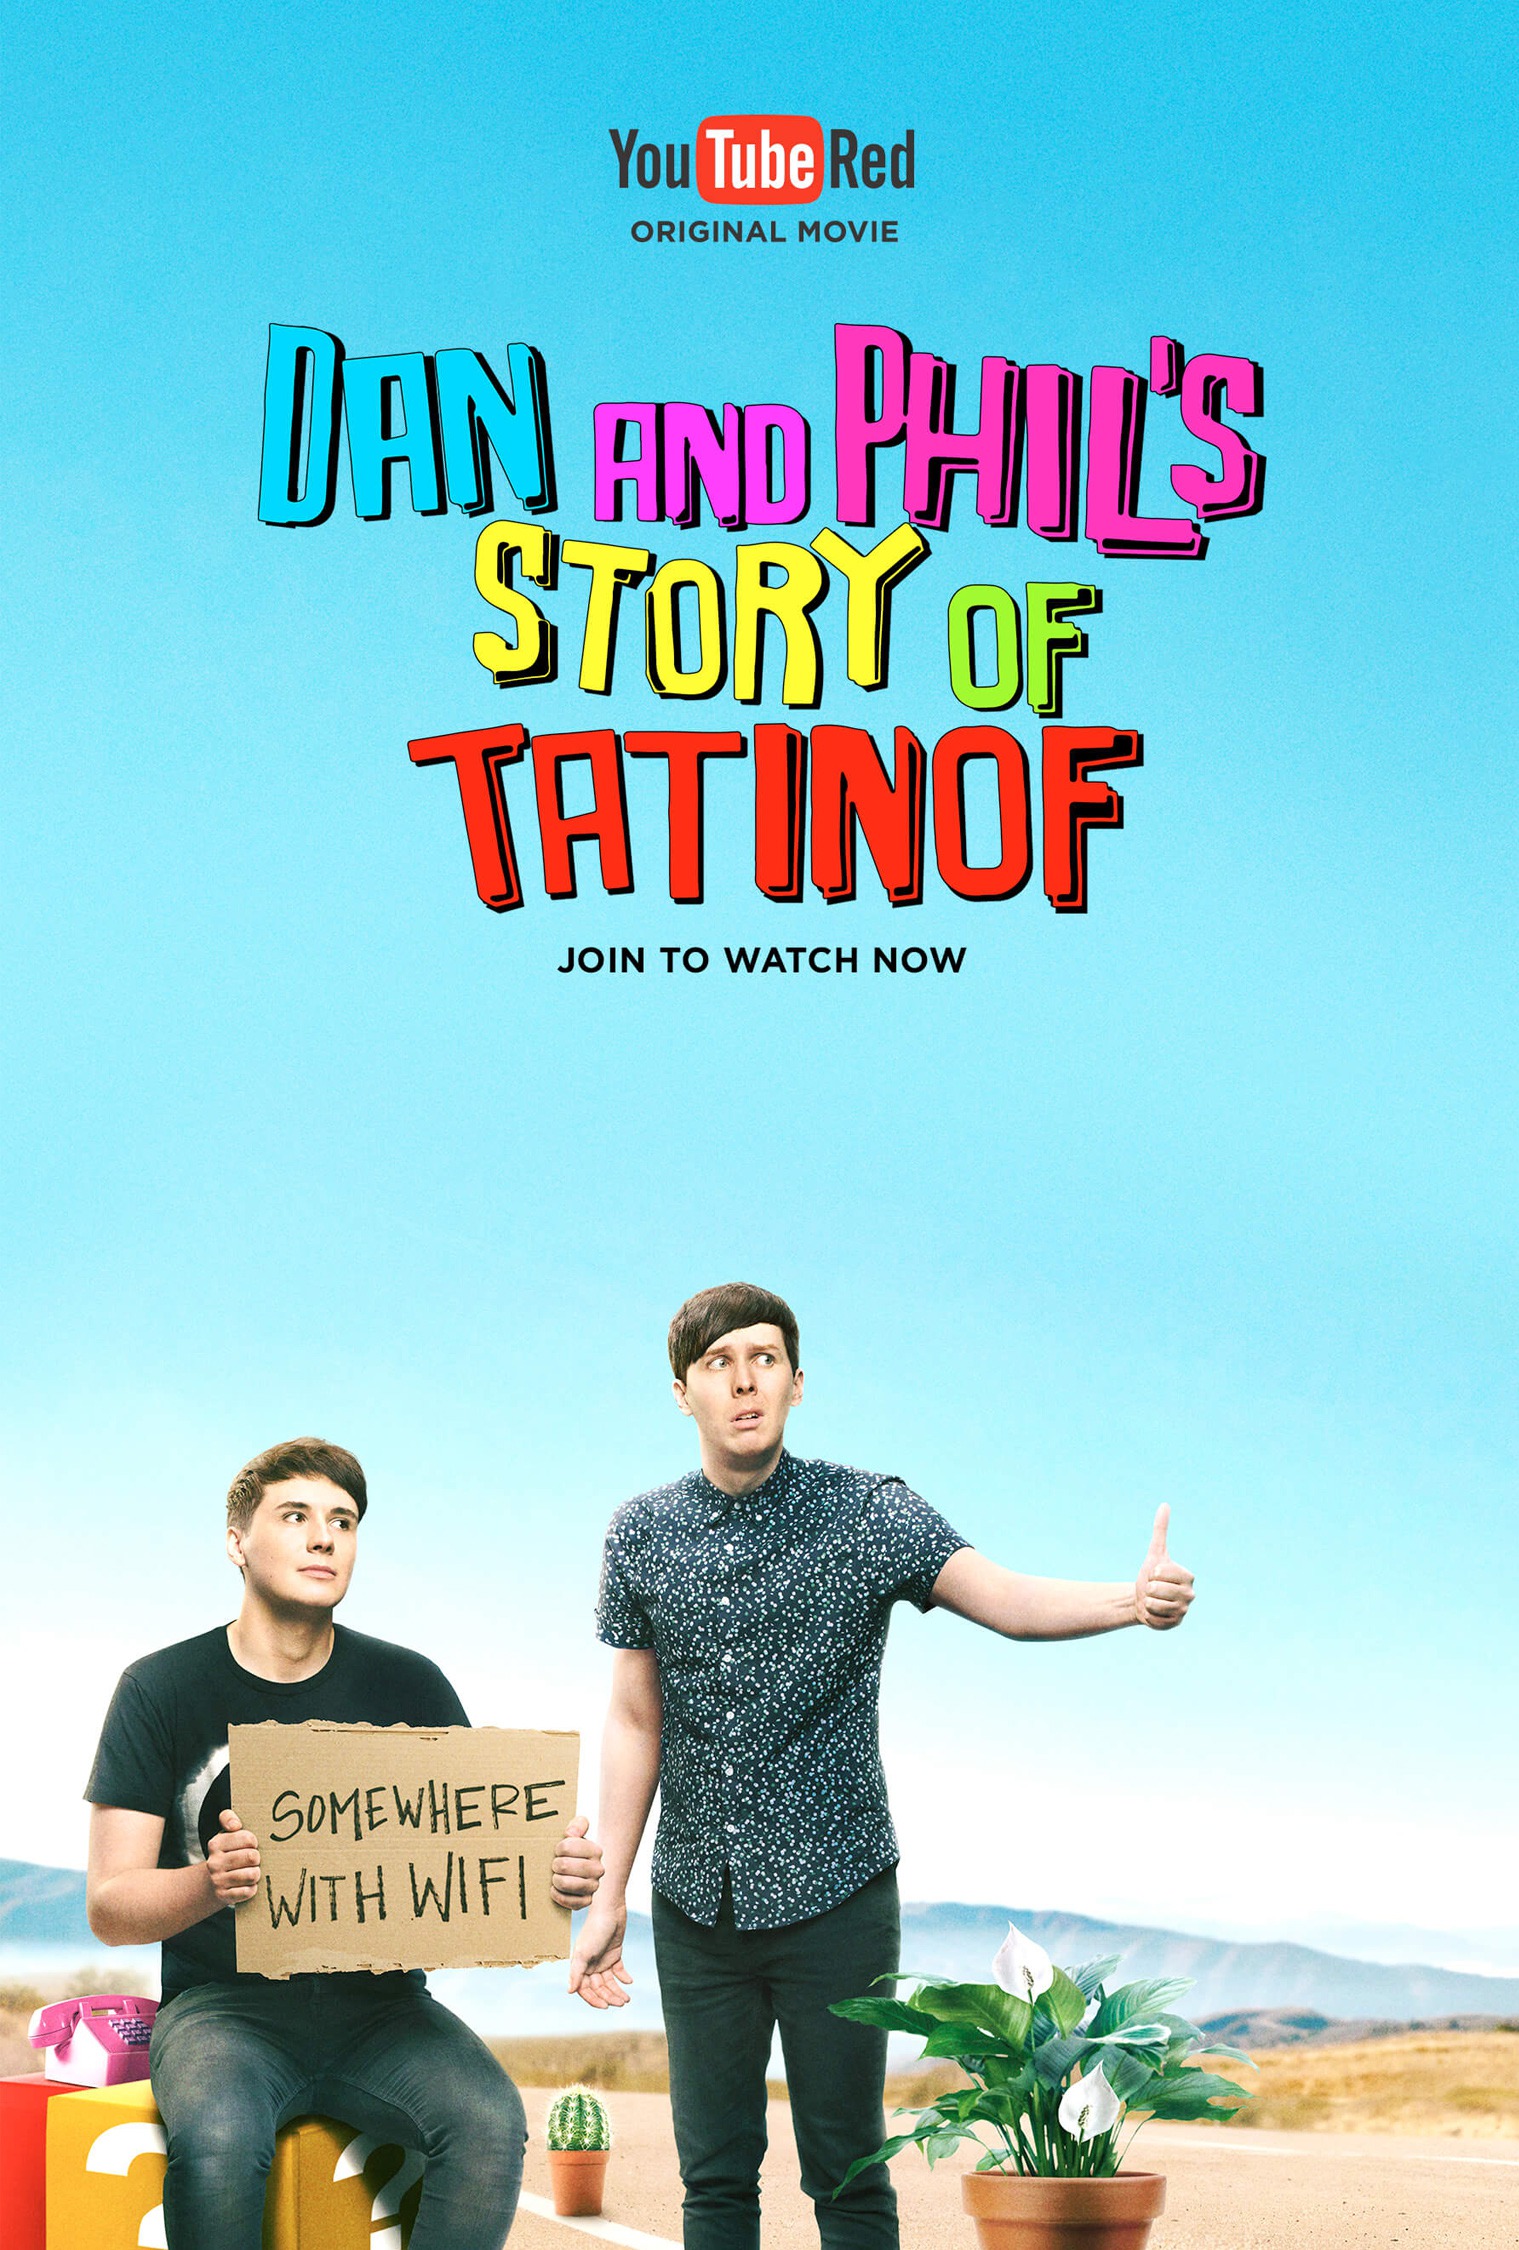 Mega Sized Movie Poster Image for Dan and Phil's Story of TATINOF (#1 of 2)